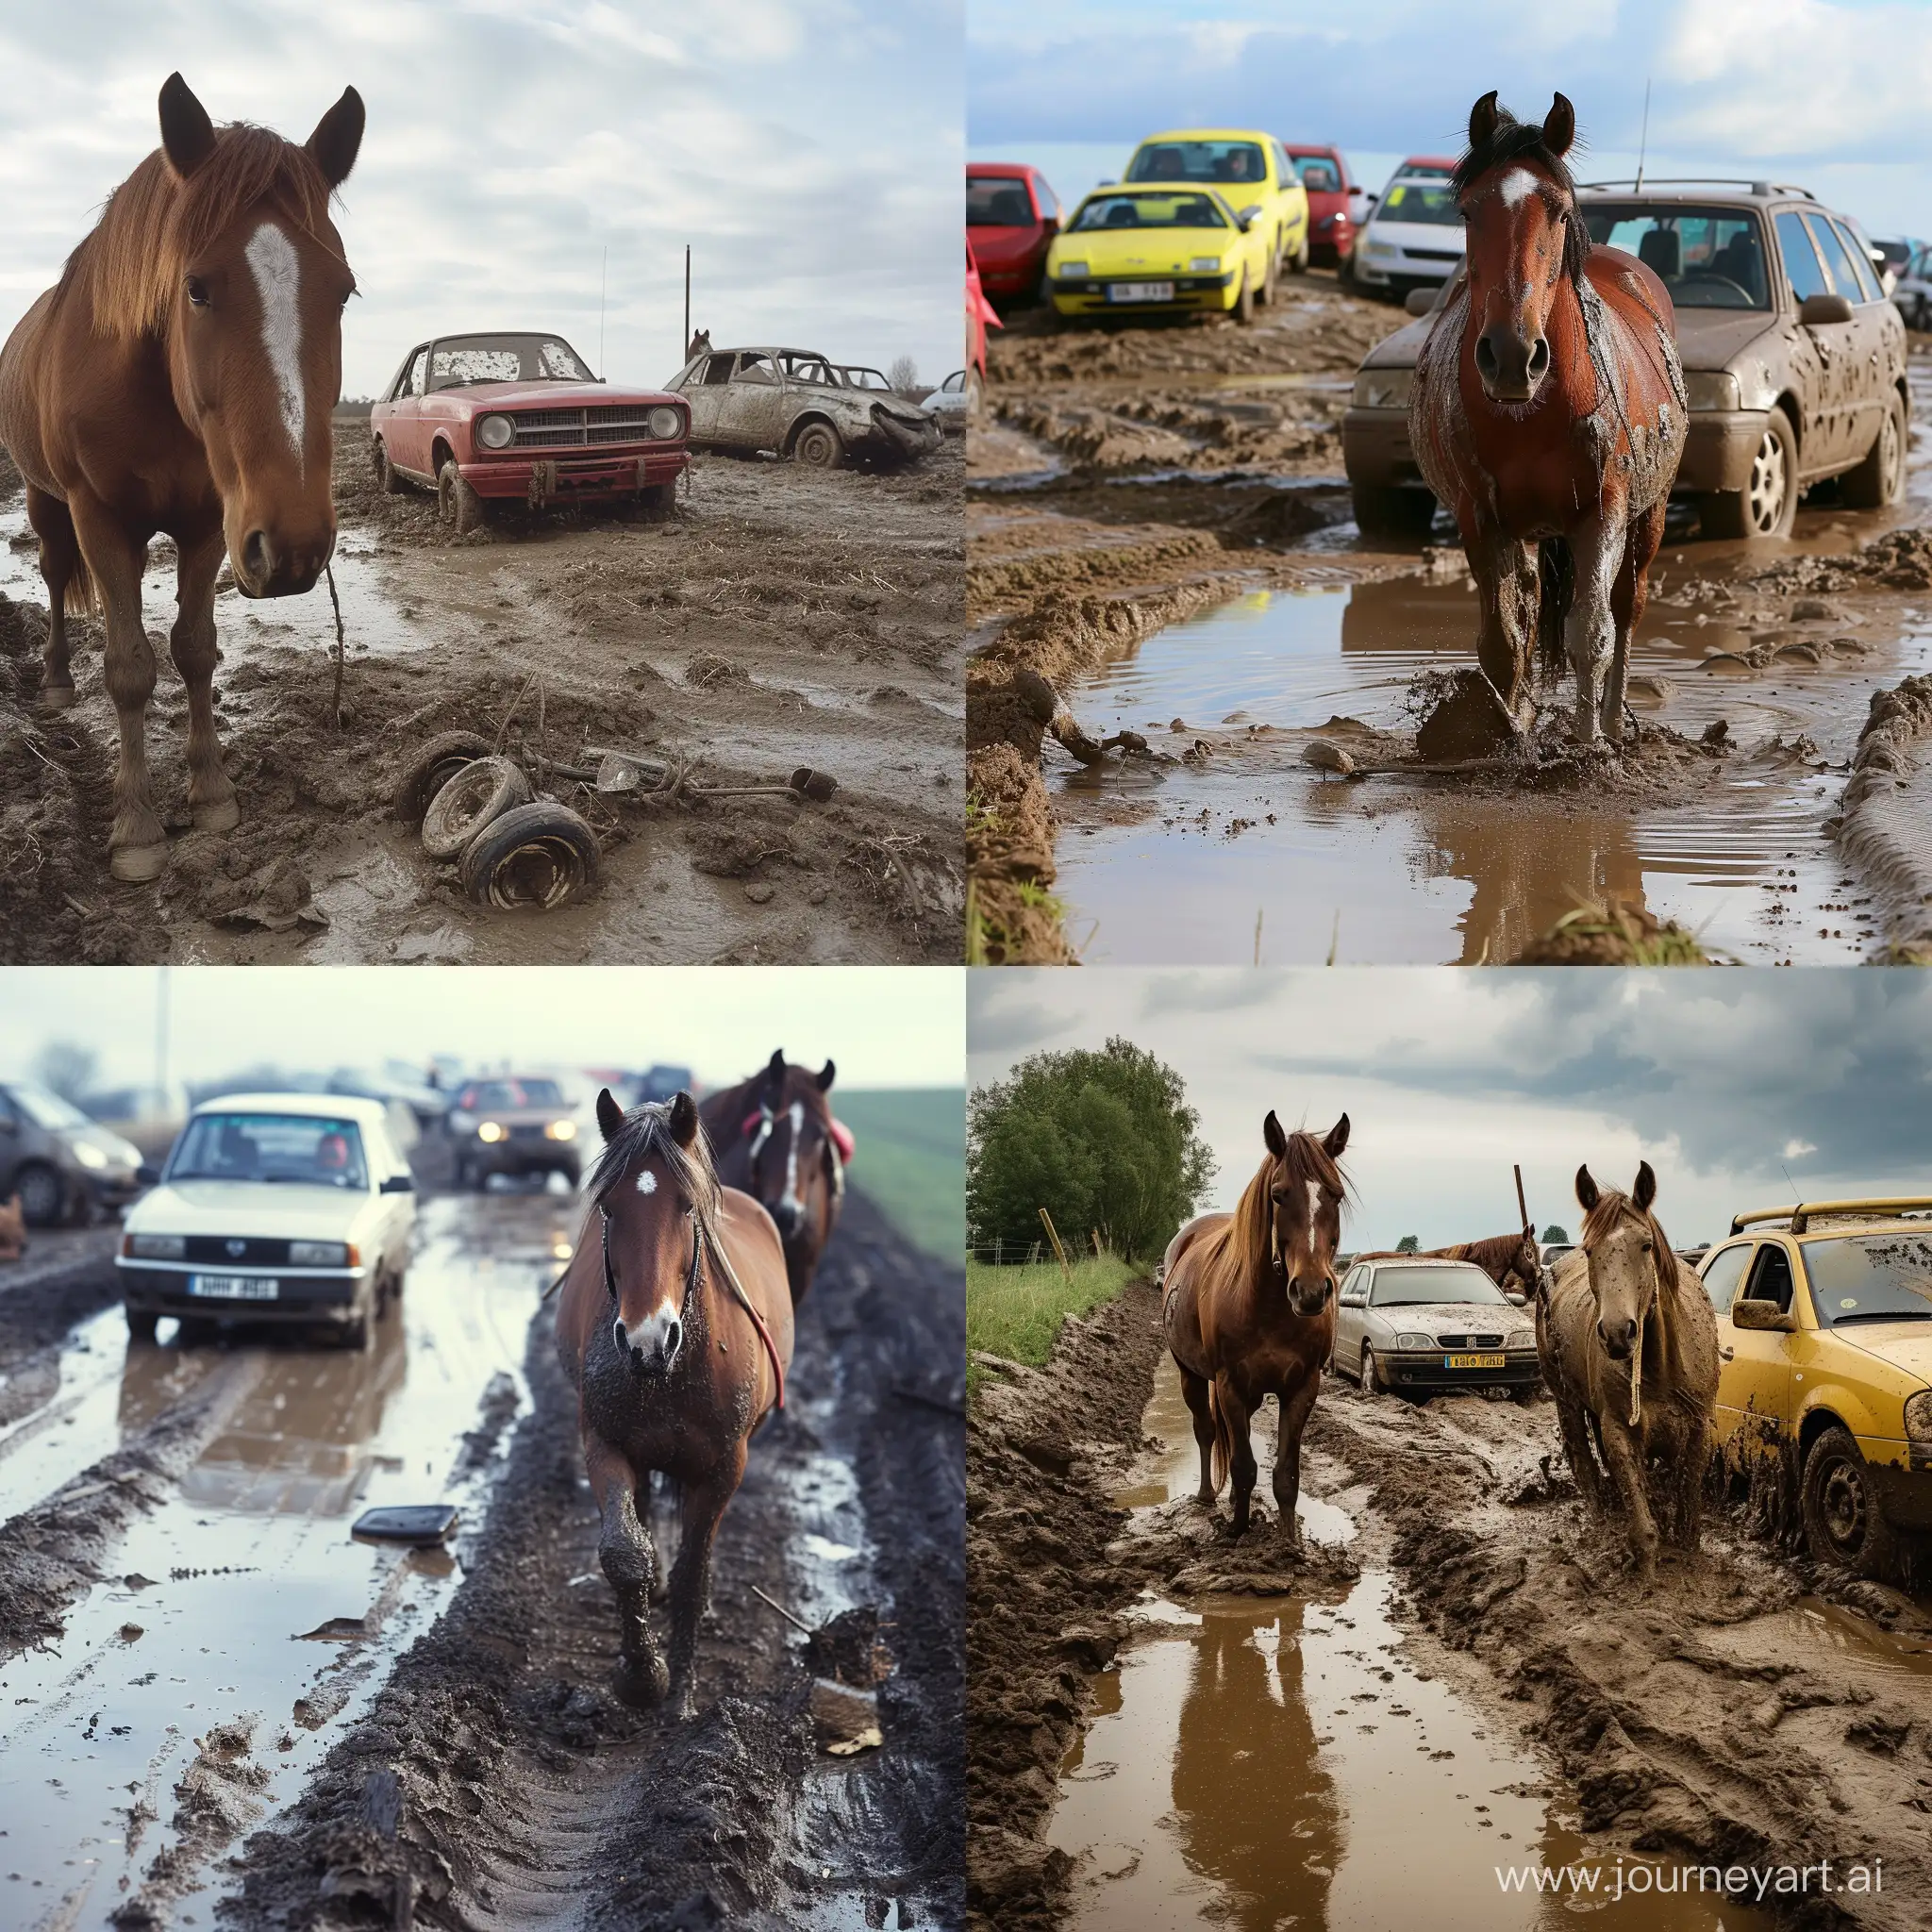 Rural-Rodeo-Horses-Cars-and-Mud-Spectacle